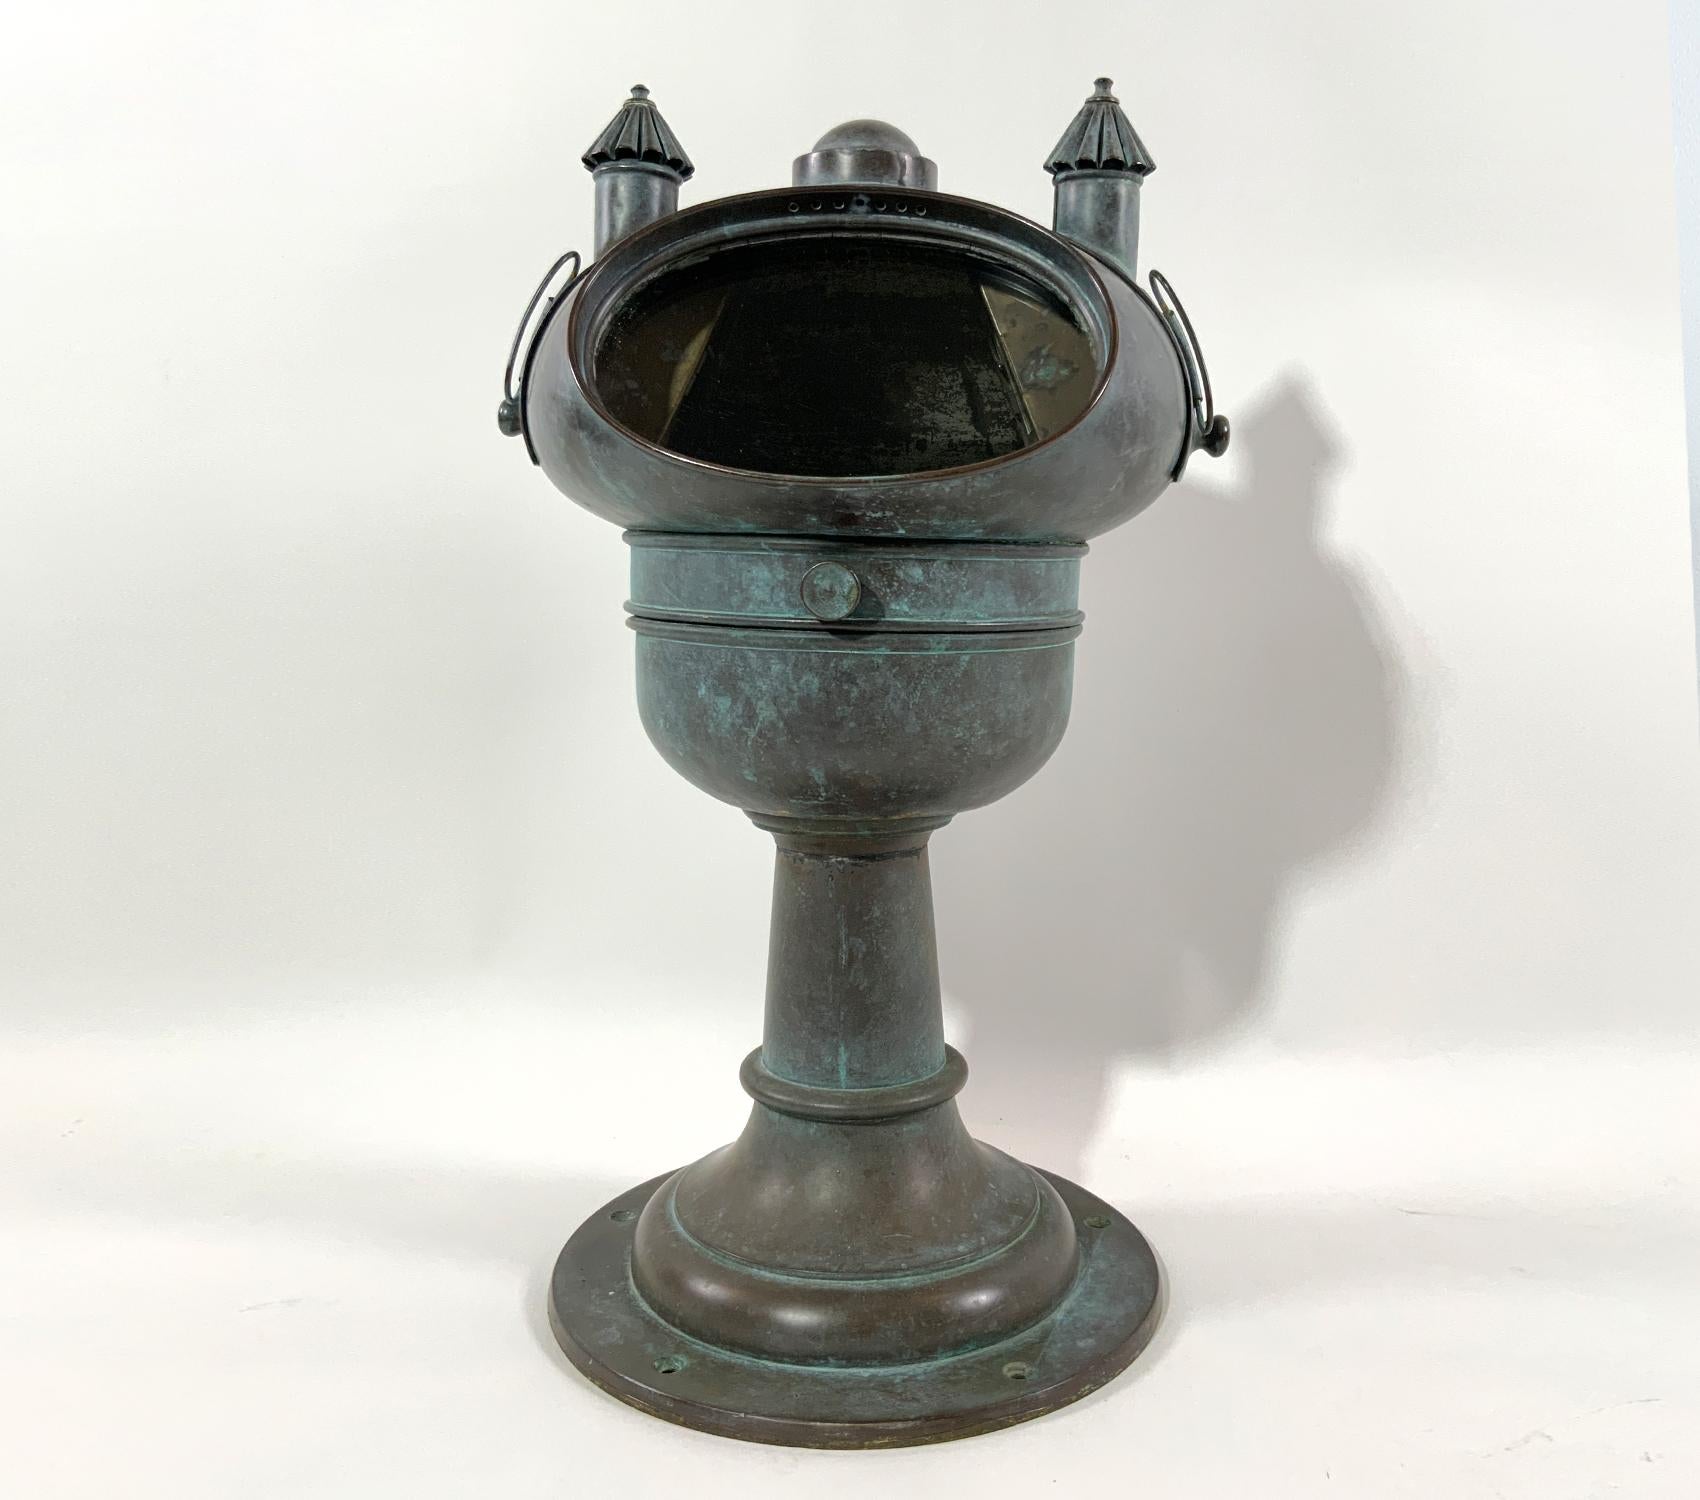 Nineteenth century yacht binnacle in original untouched condition. With mushroom top and matching burners. Oval viewing port exposes the gimbaled compass marked with makers name of a 